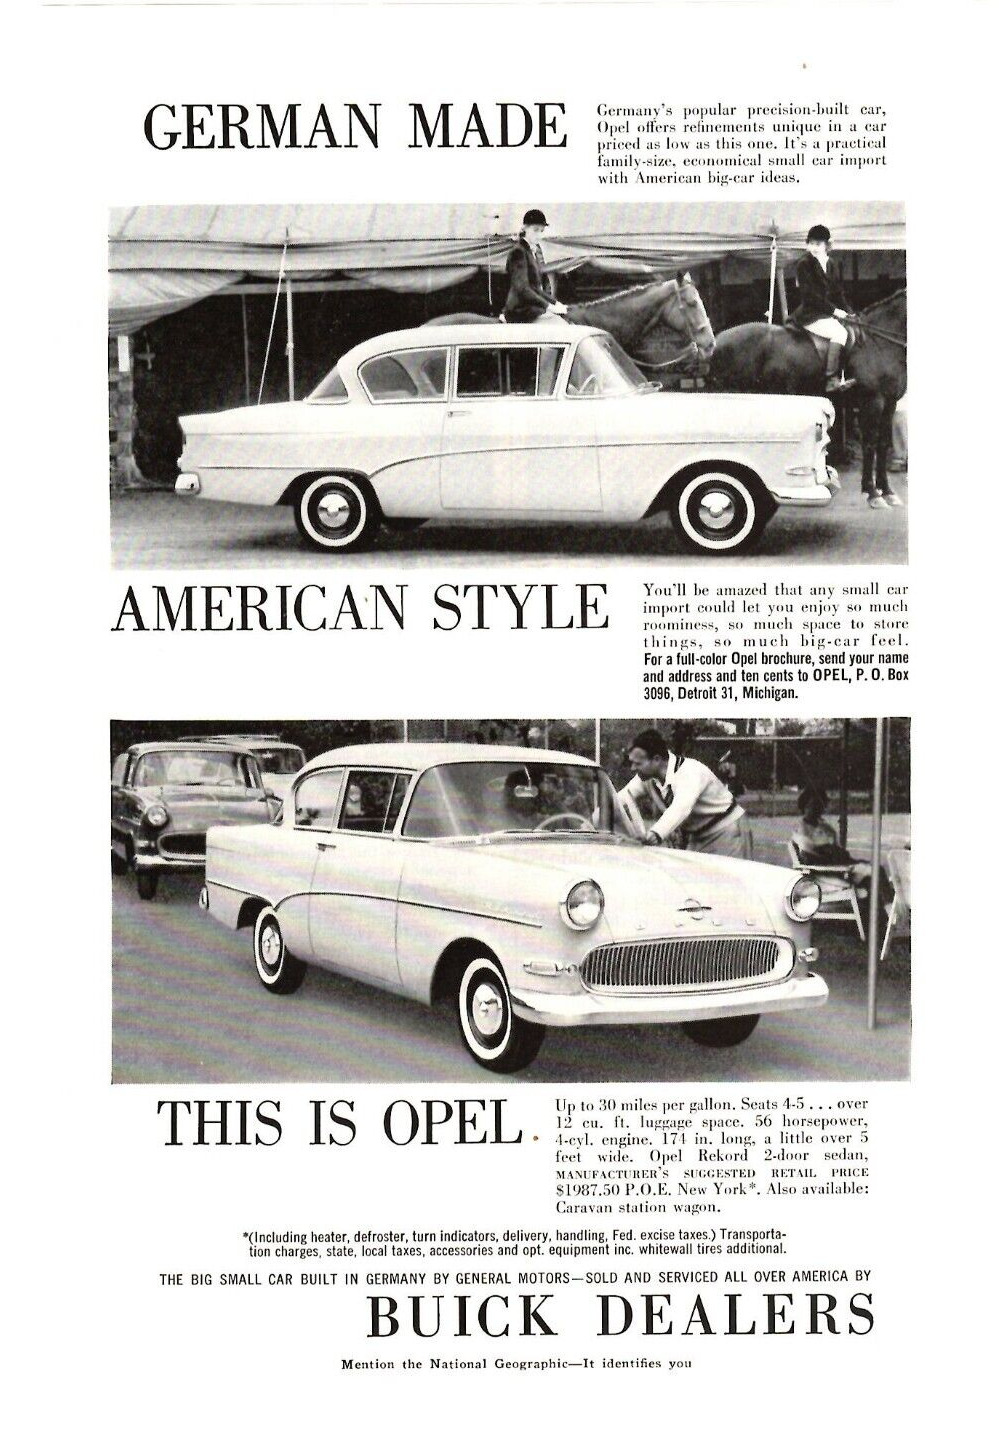 1959 Print Ad Buick Dealers Opel German Made American Style Big Small Car GM